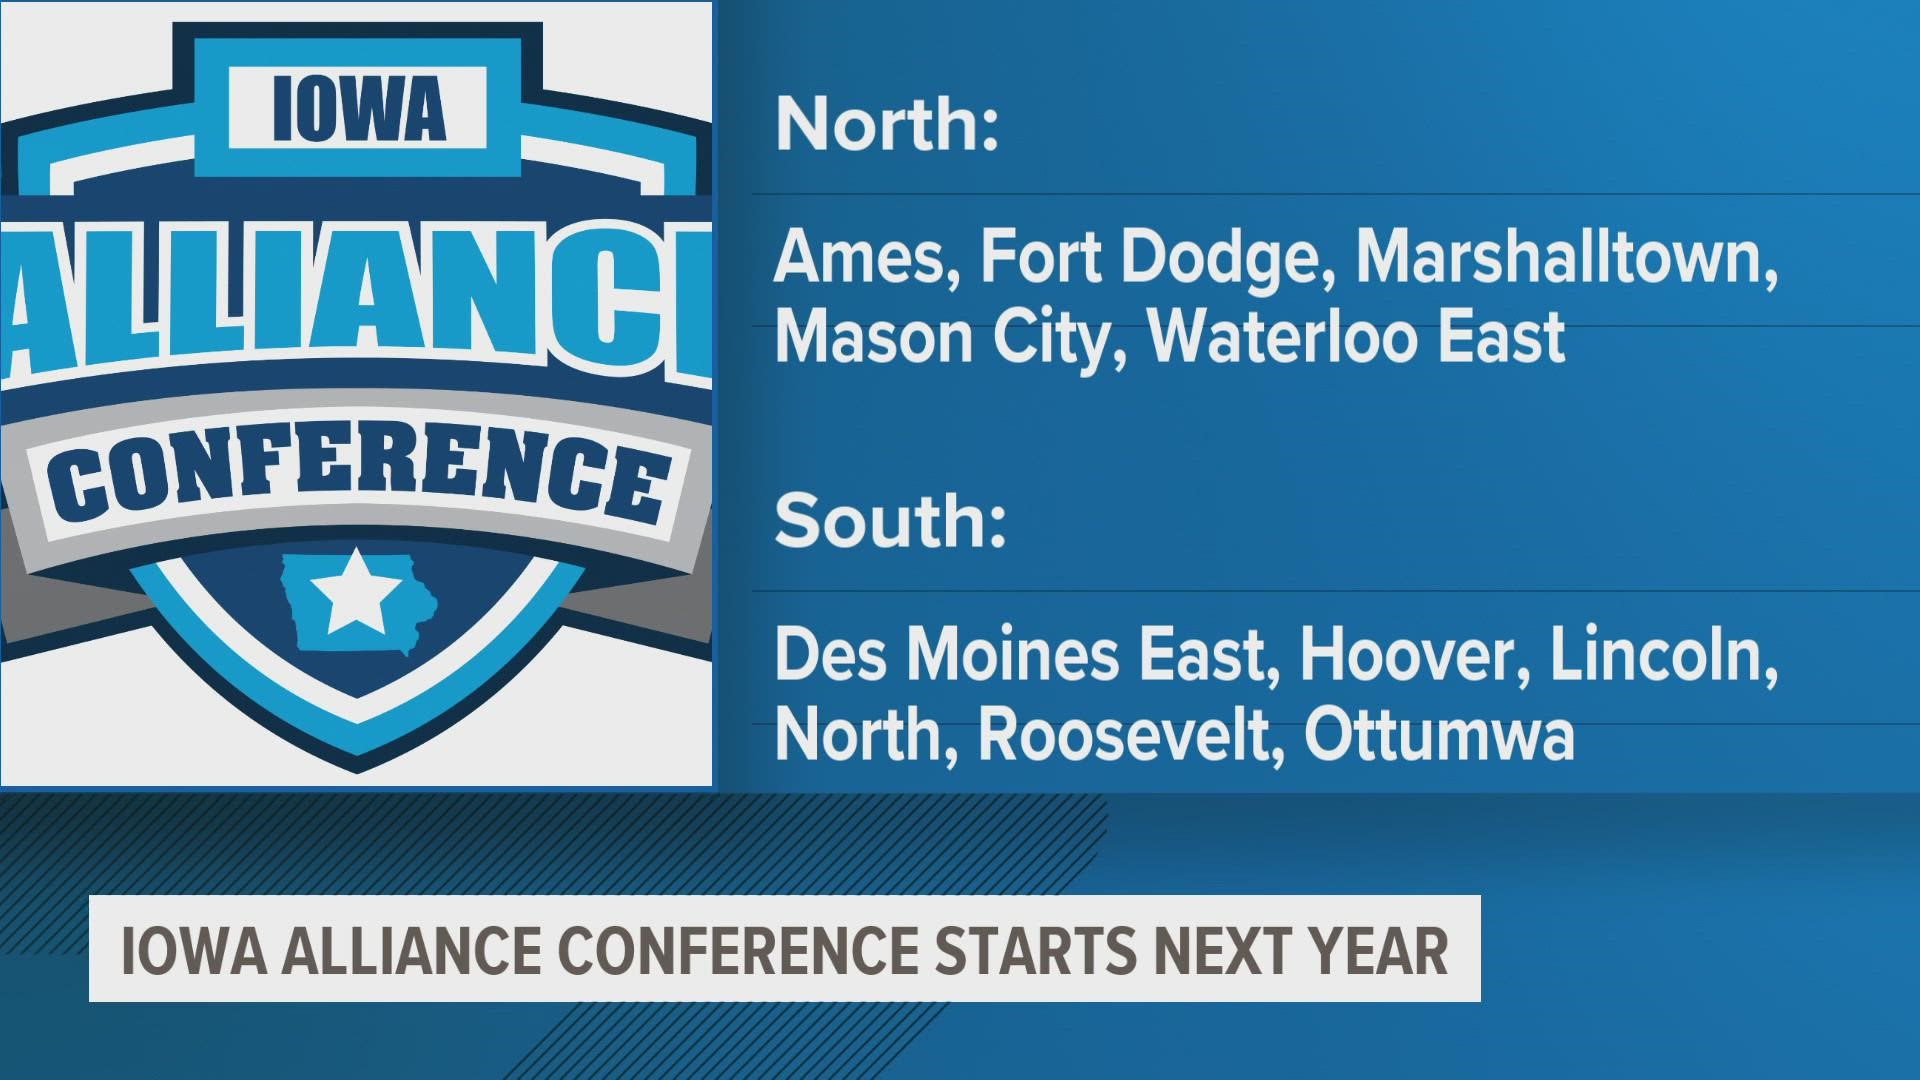 11 Iowa high schools will begin competing in the conference in the 2022-23 year.